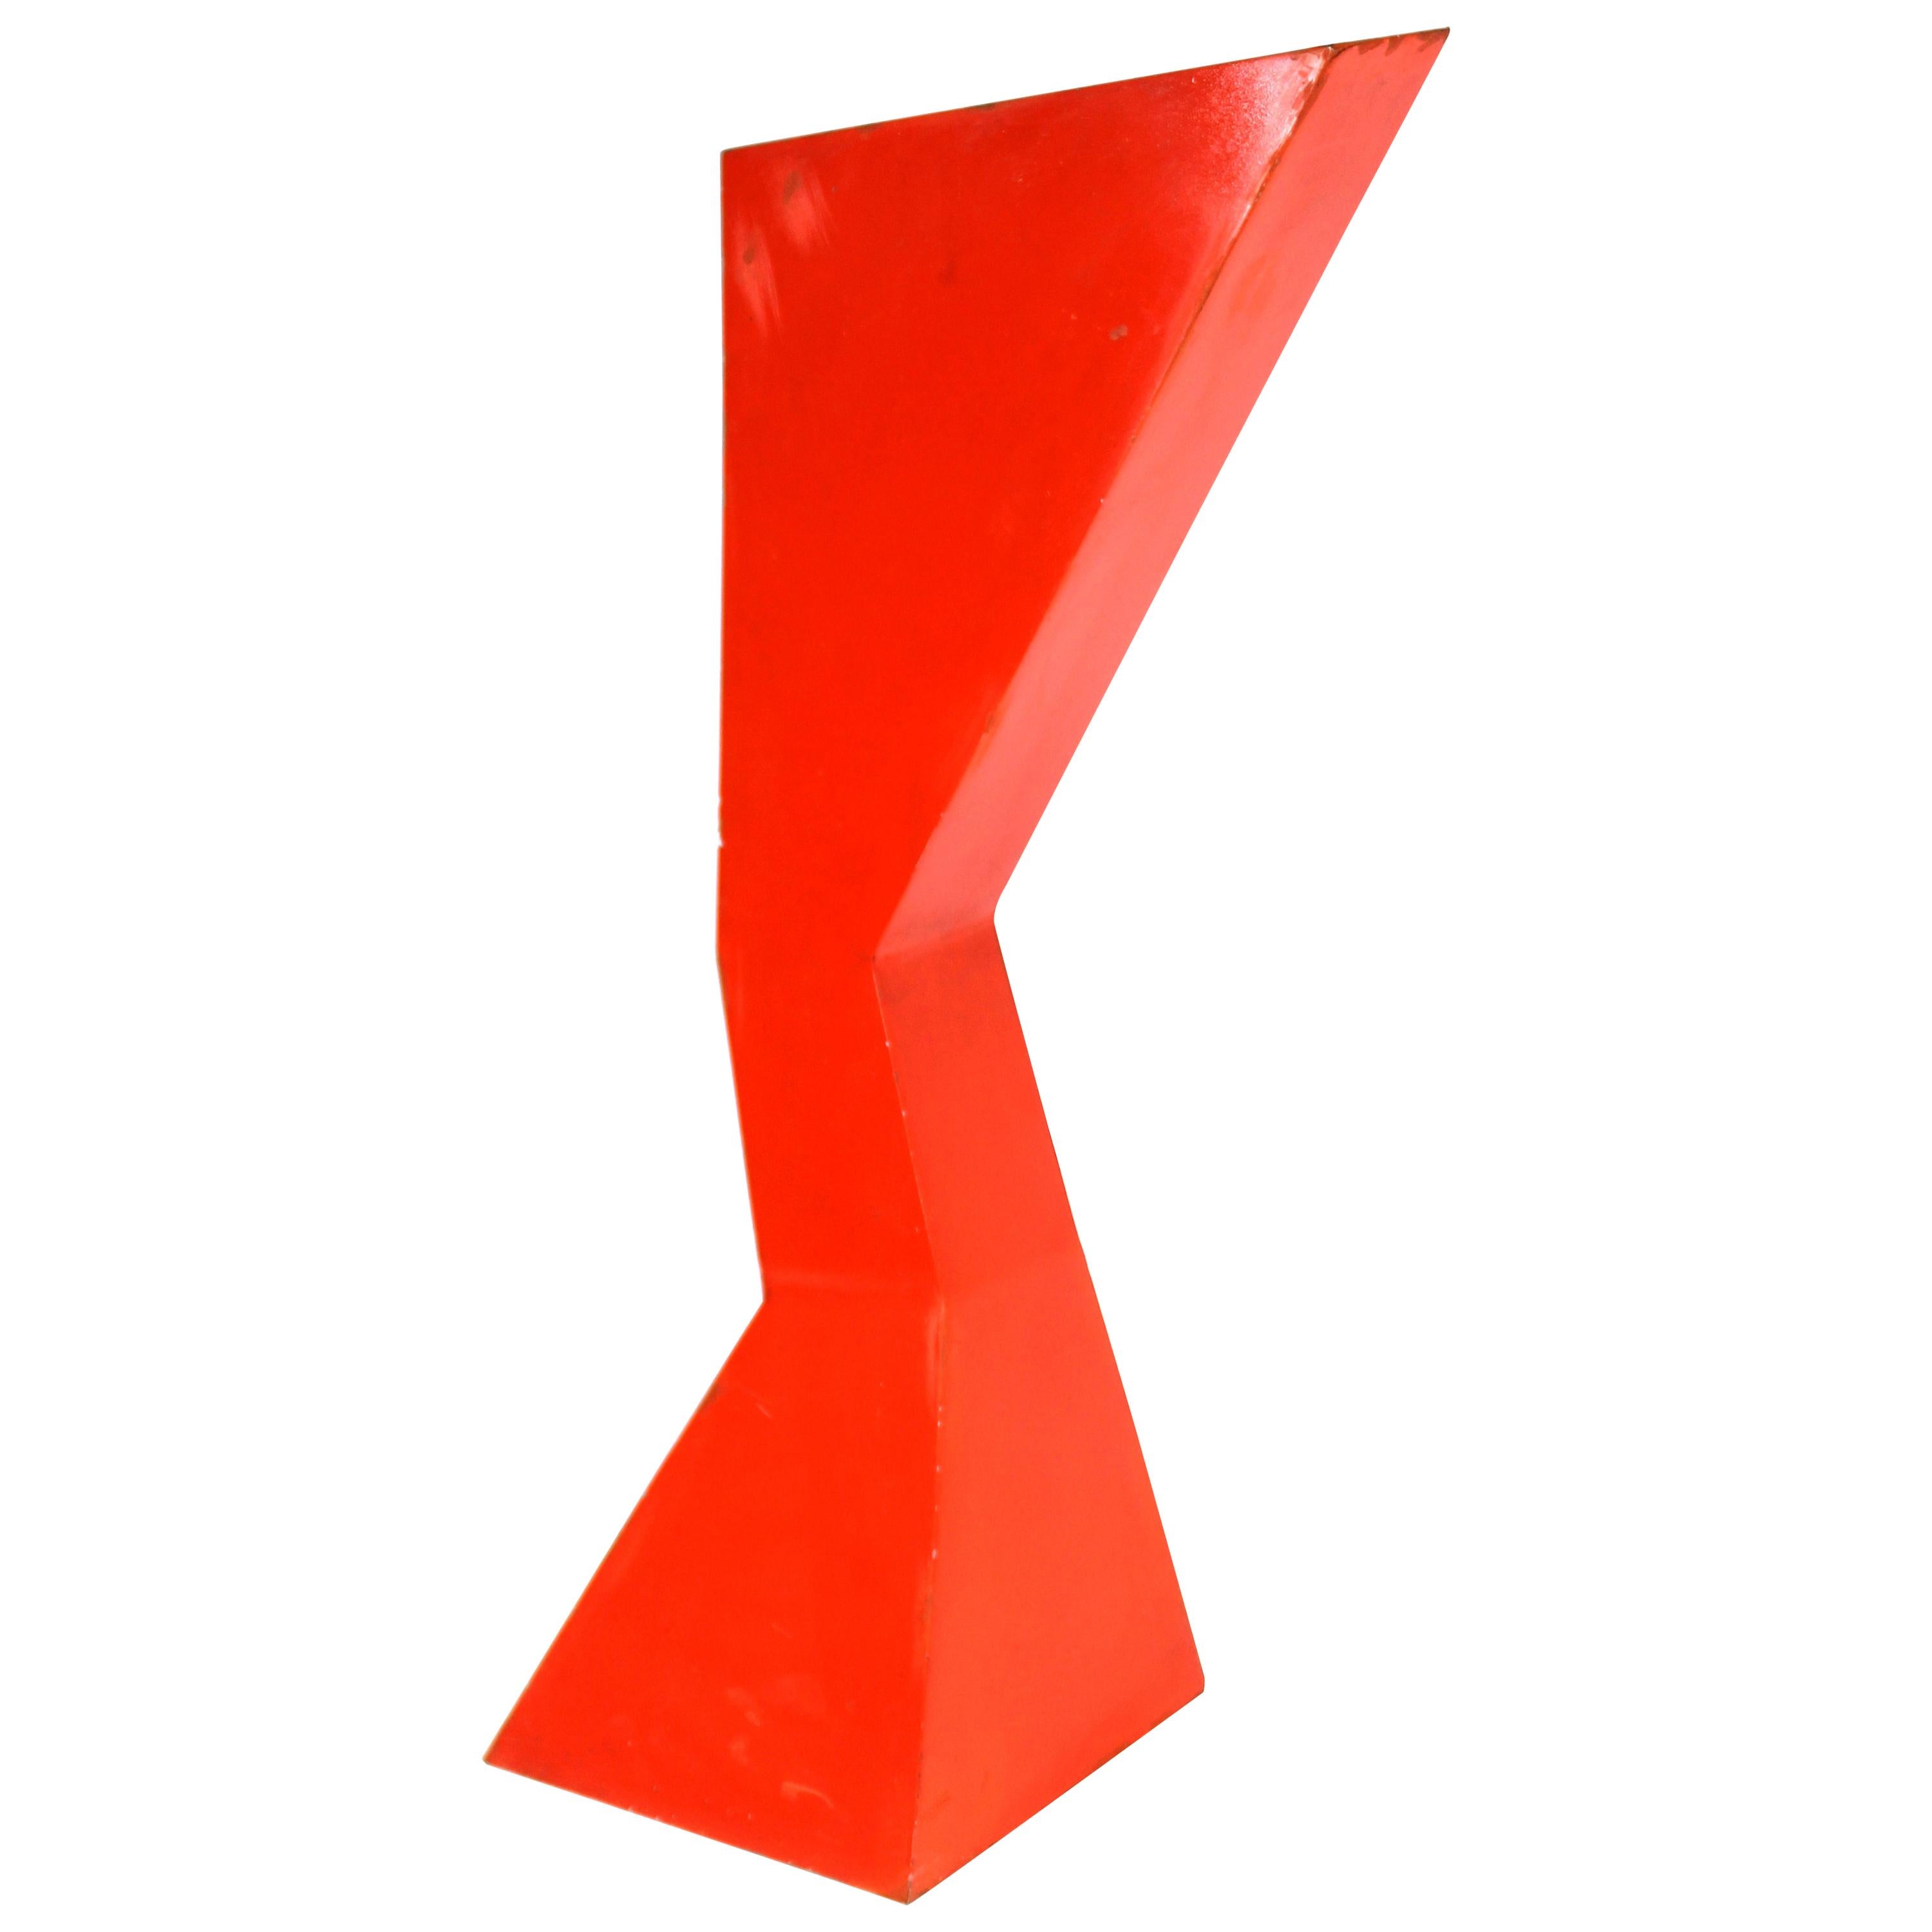 Modern Abstract Red Enameled Metal Sculpture